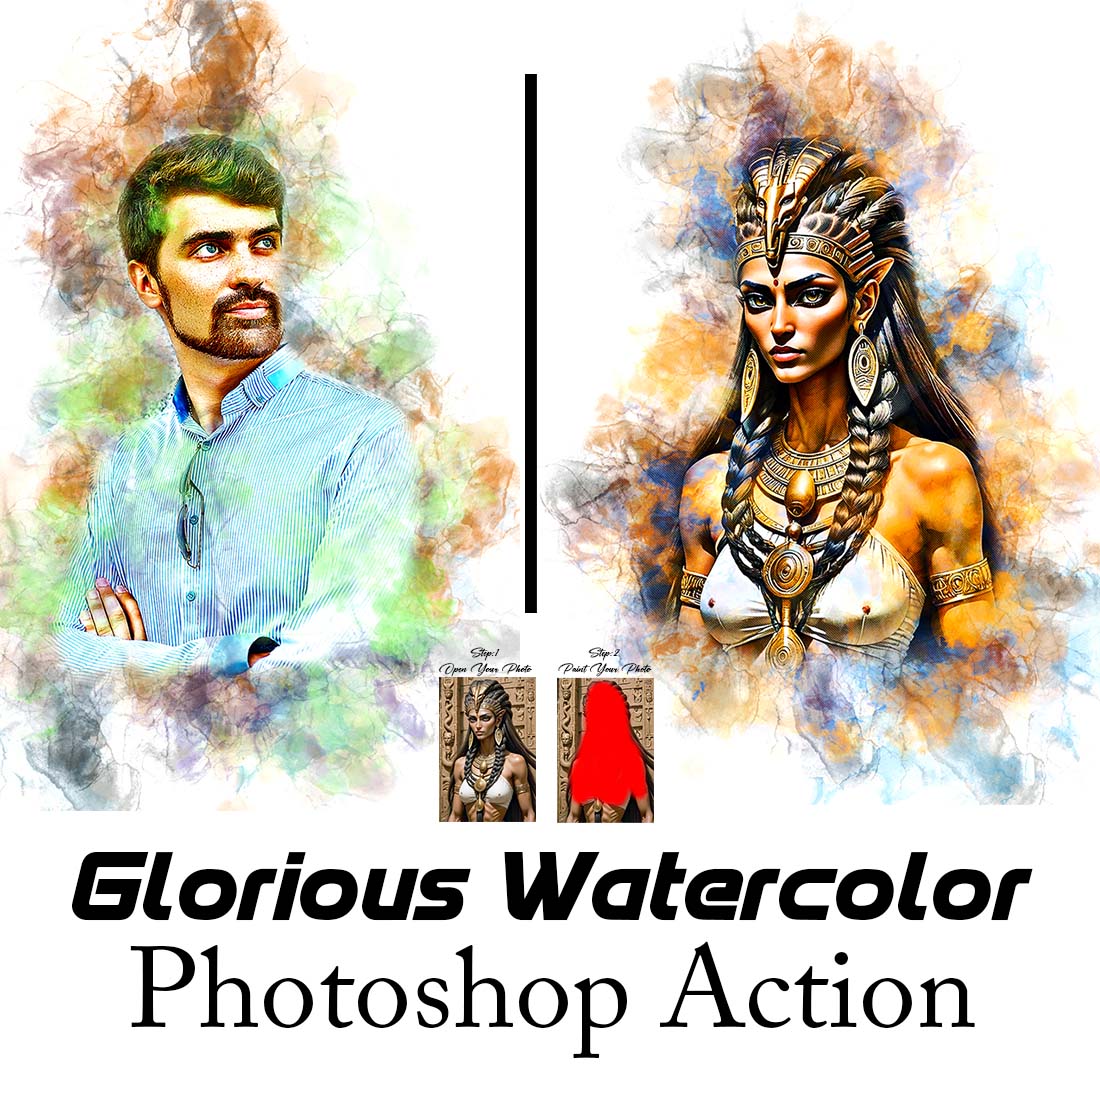 Glorious Watercolor Photoshop Action cover image.